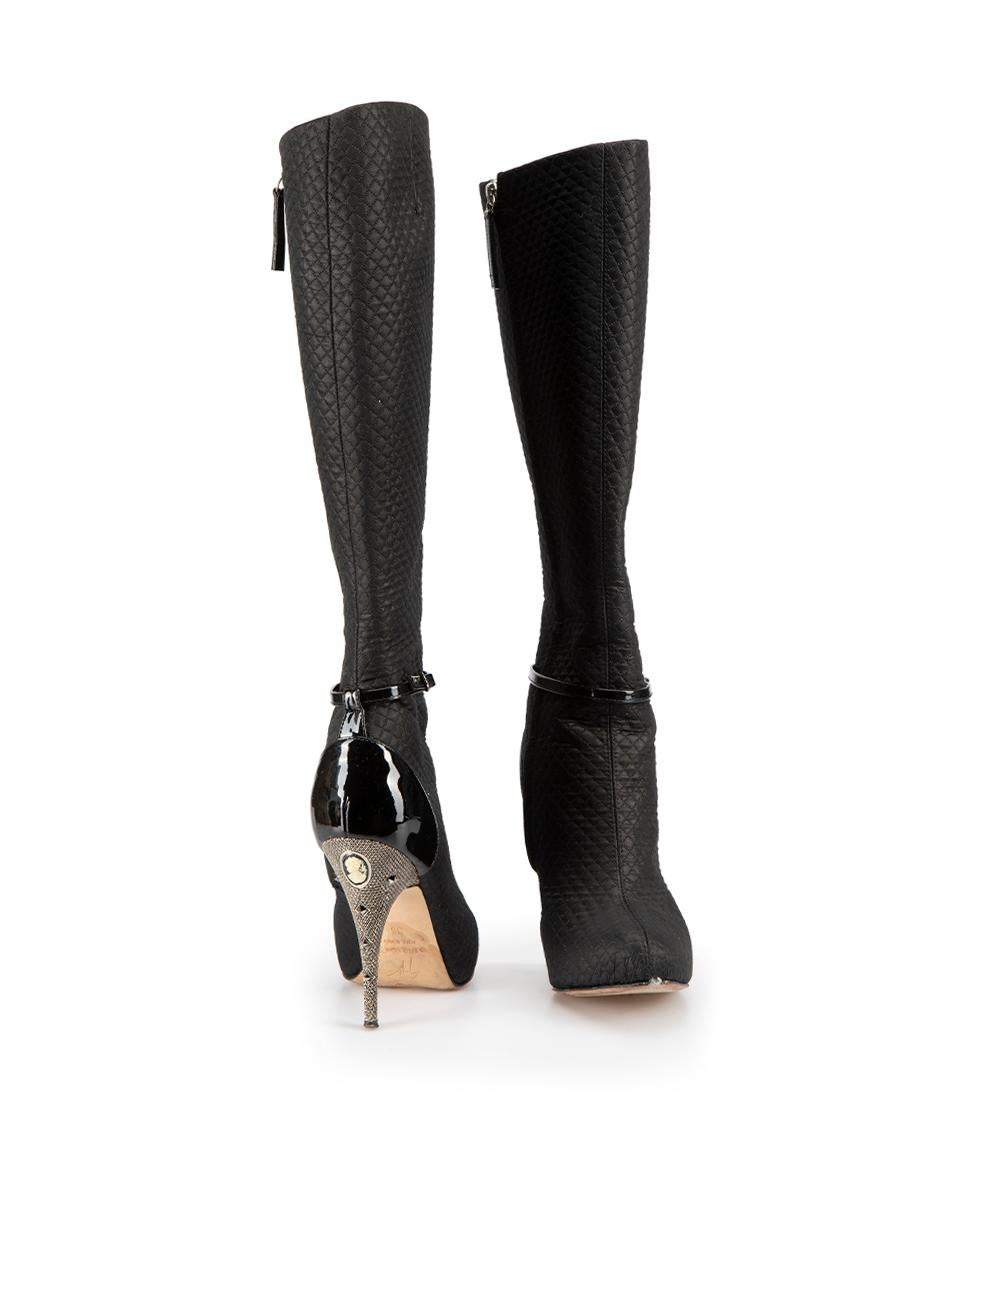 Giuseppe Zanotti Black Metallic Quilted Stud Detail Knee Boots Size IT 35 In Good Condition For Sale In London, GB